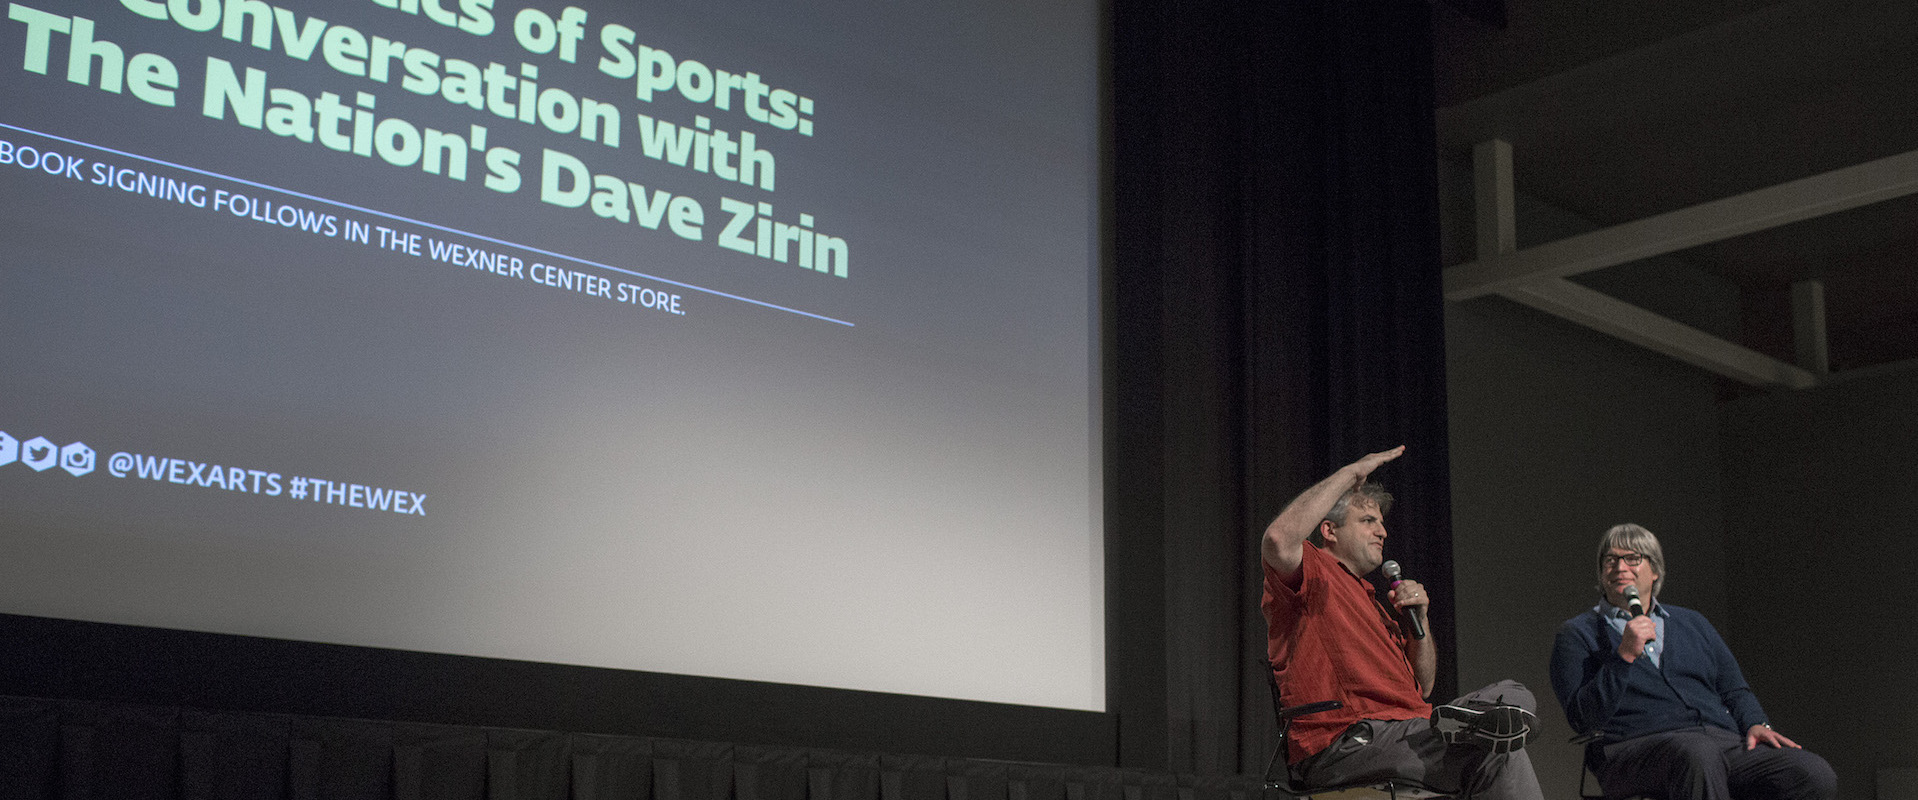 Dave Zirin, author and sports editor for the Nation, speaks with Film/Video Director David Filipi on the stage of the Film/Video Theater at the Wexner Center for the Arts on September 10, 2018